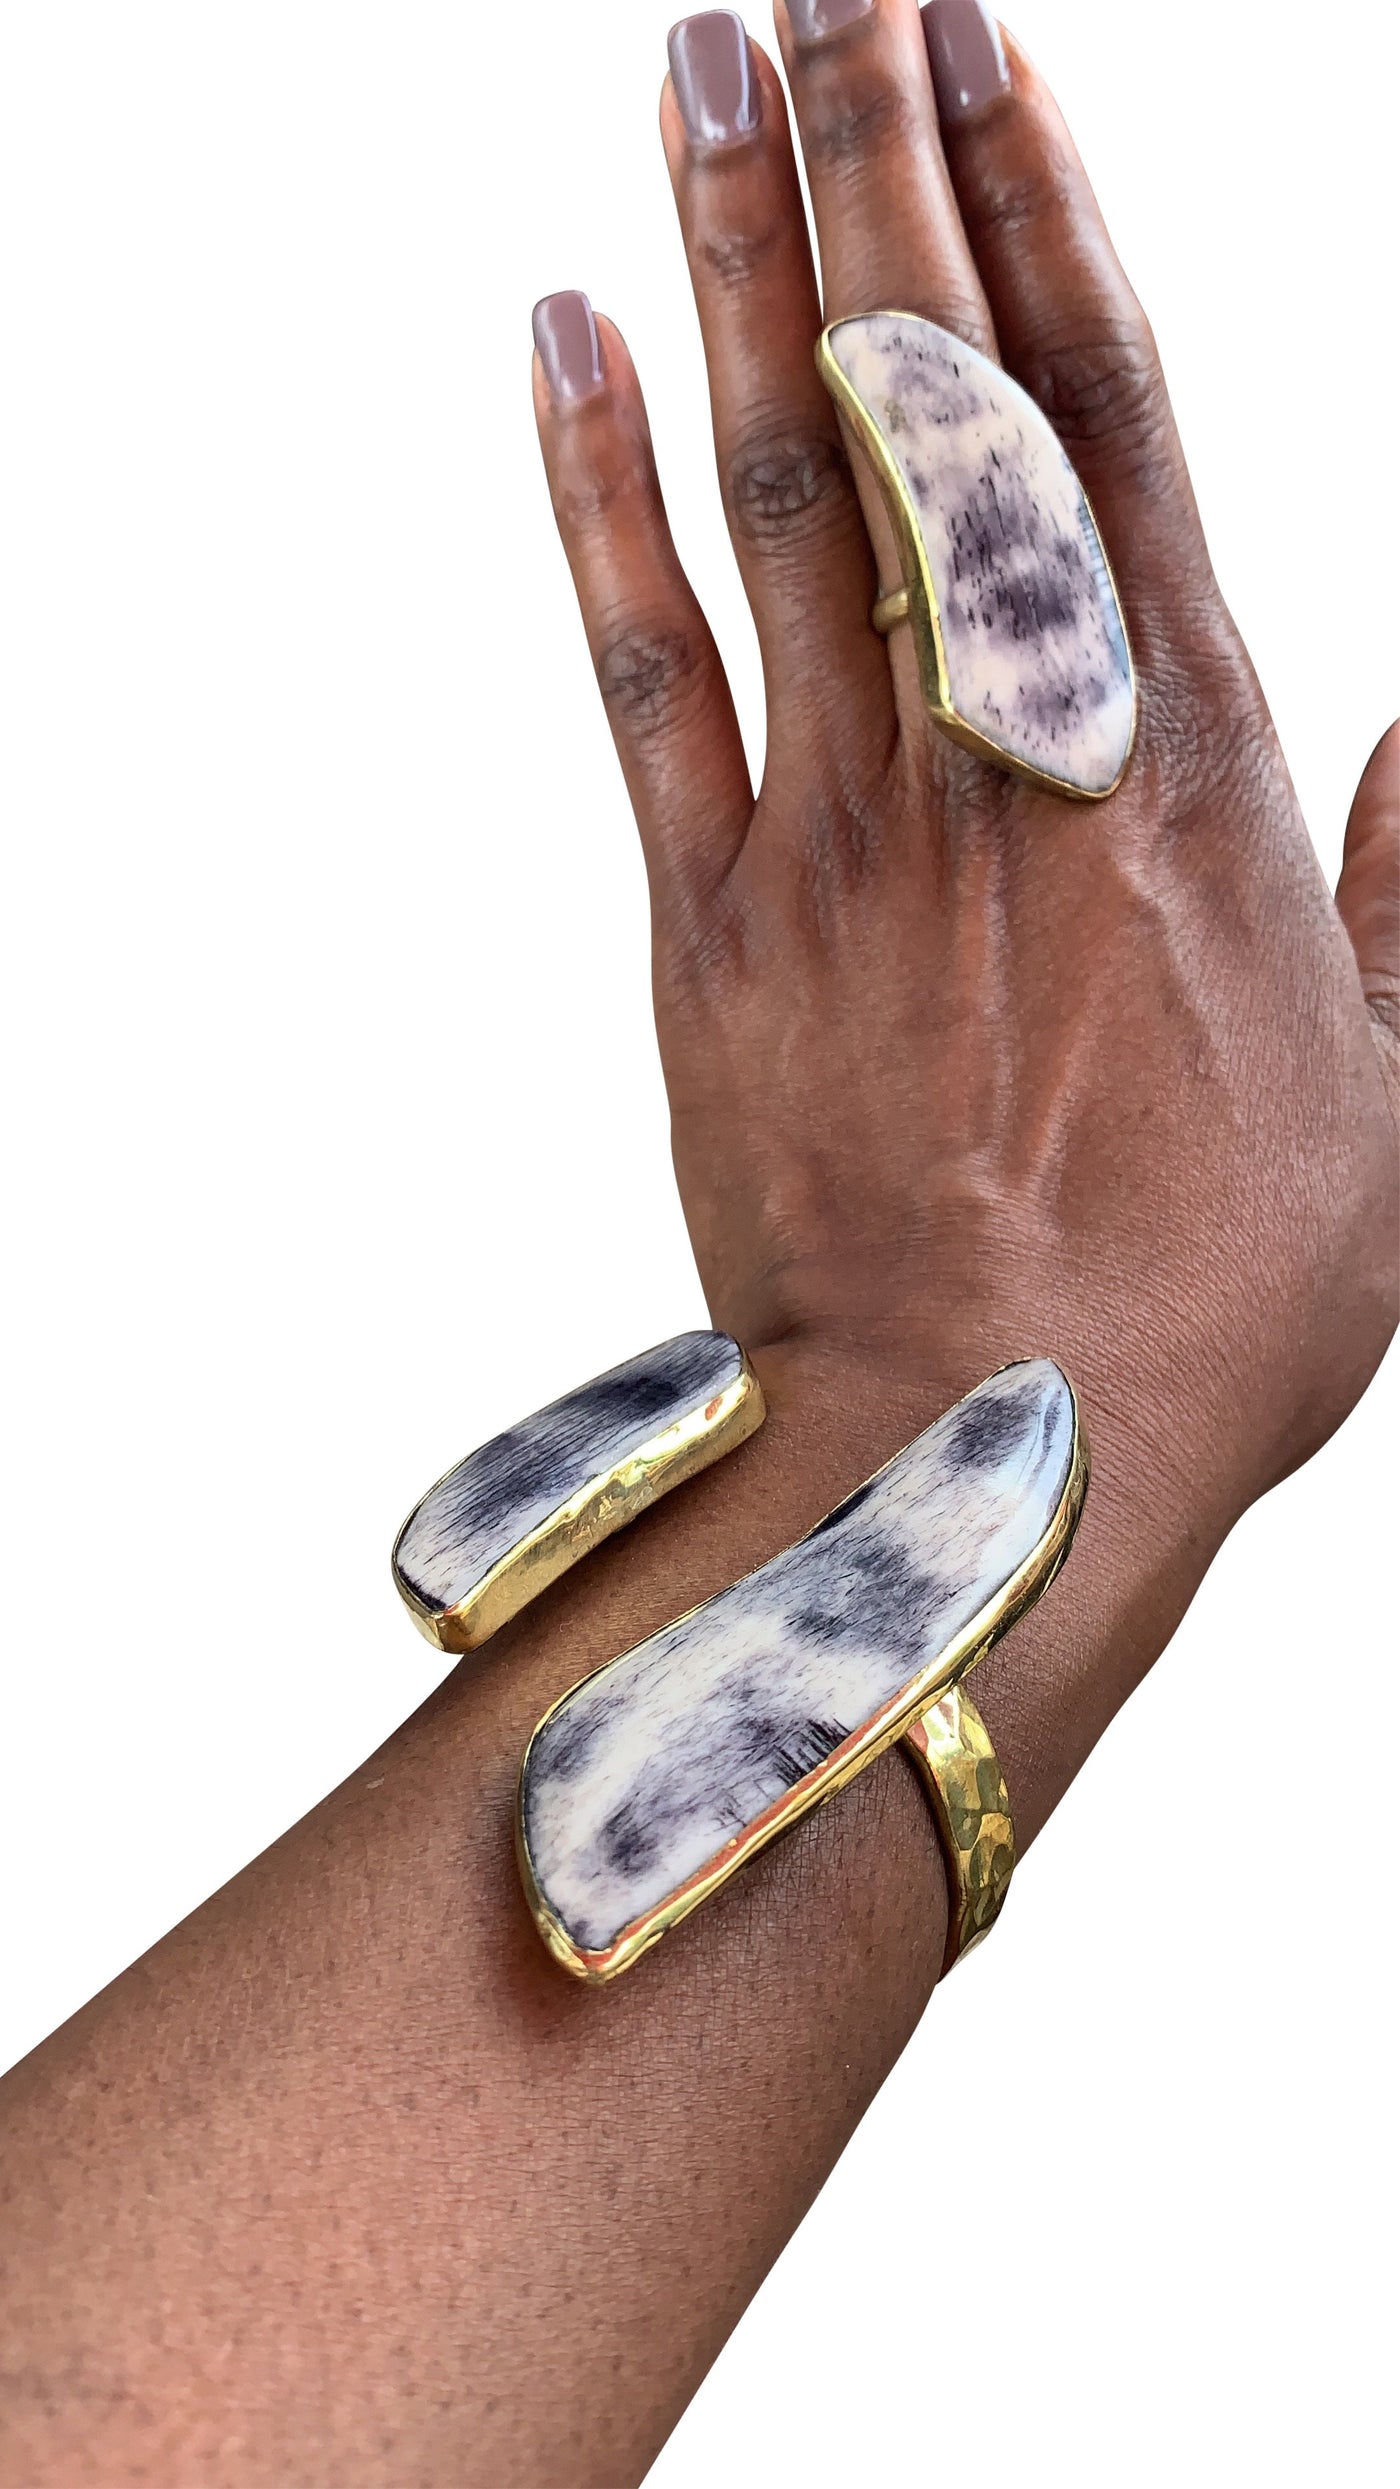 Bone Soldered Double Cuff Collection